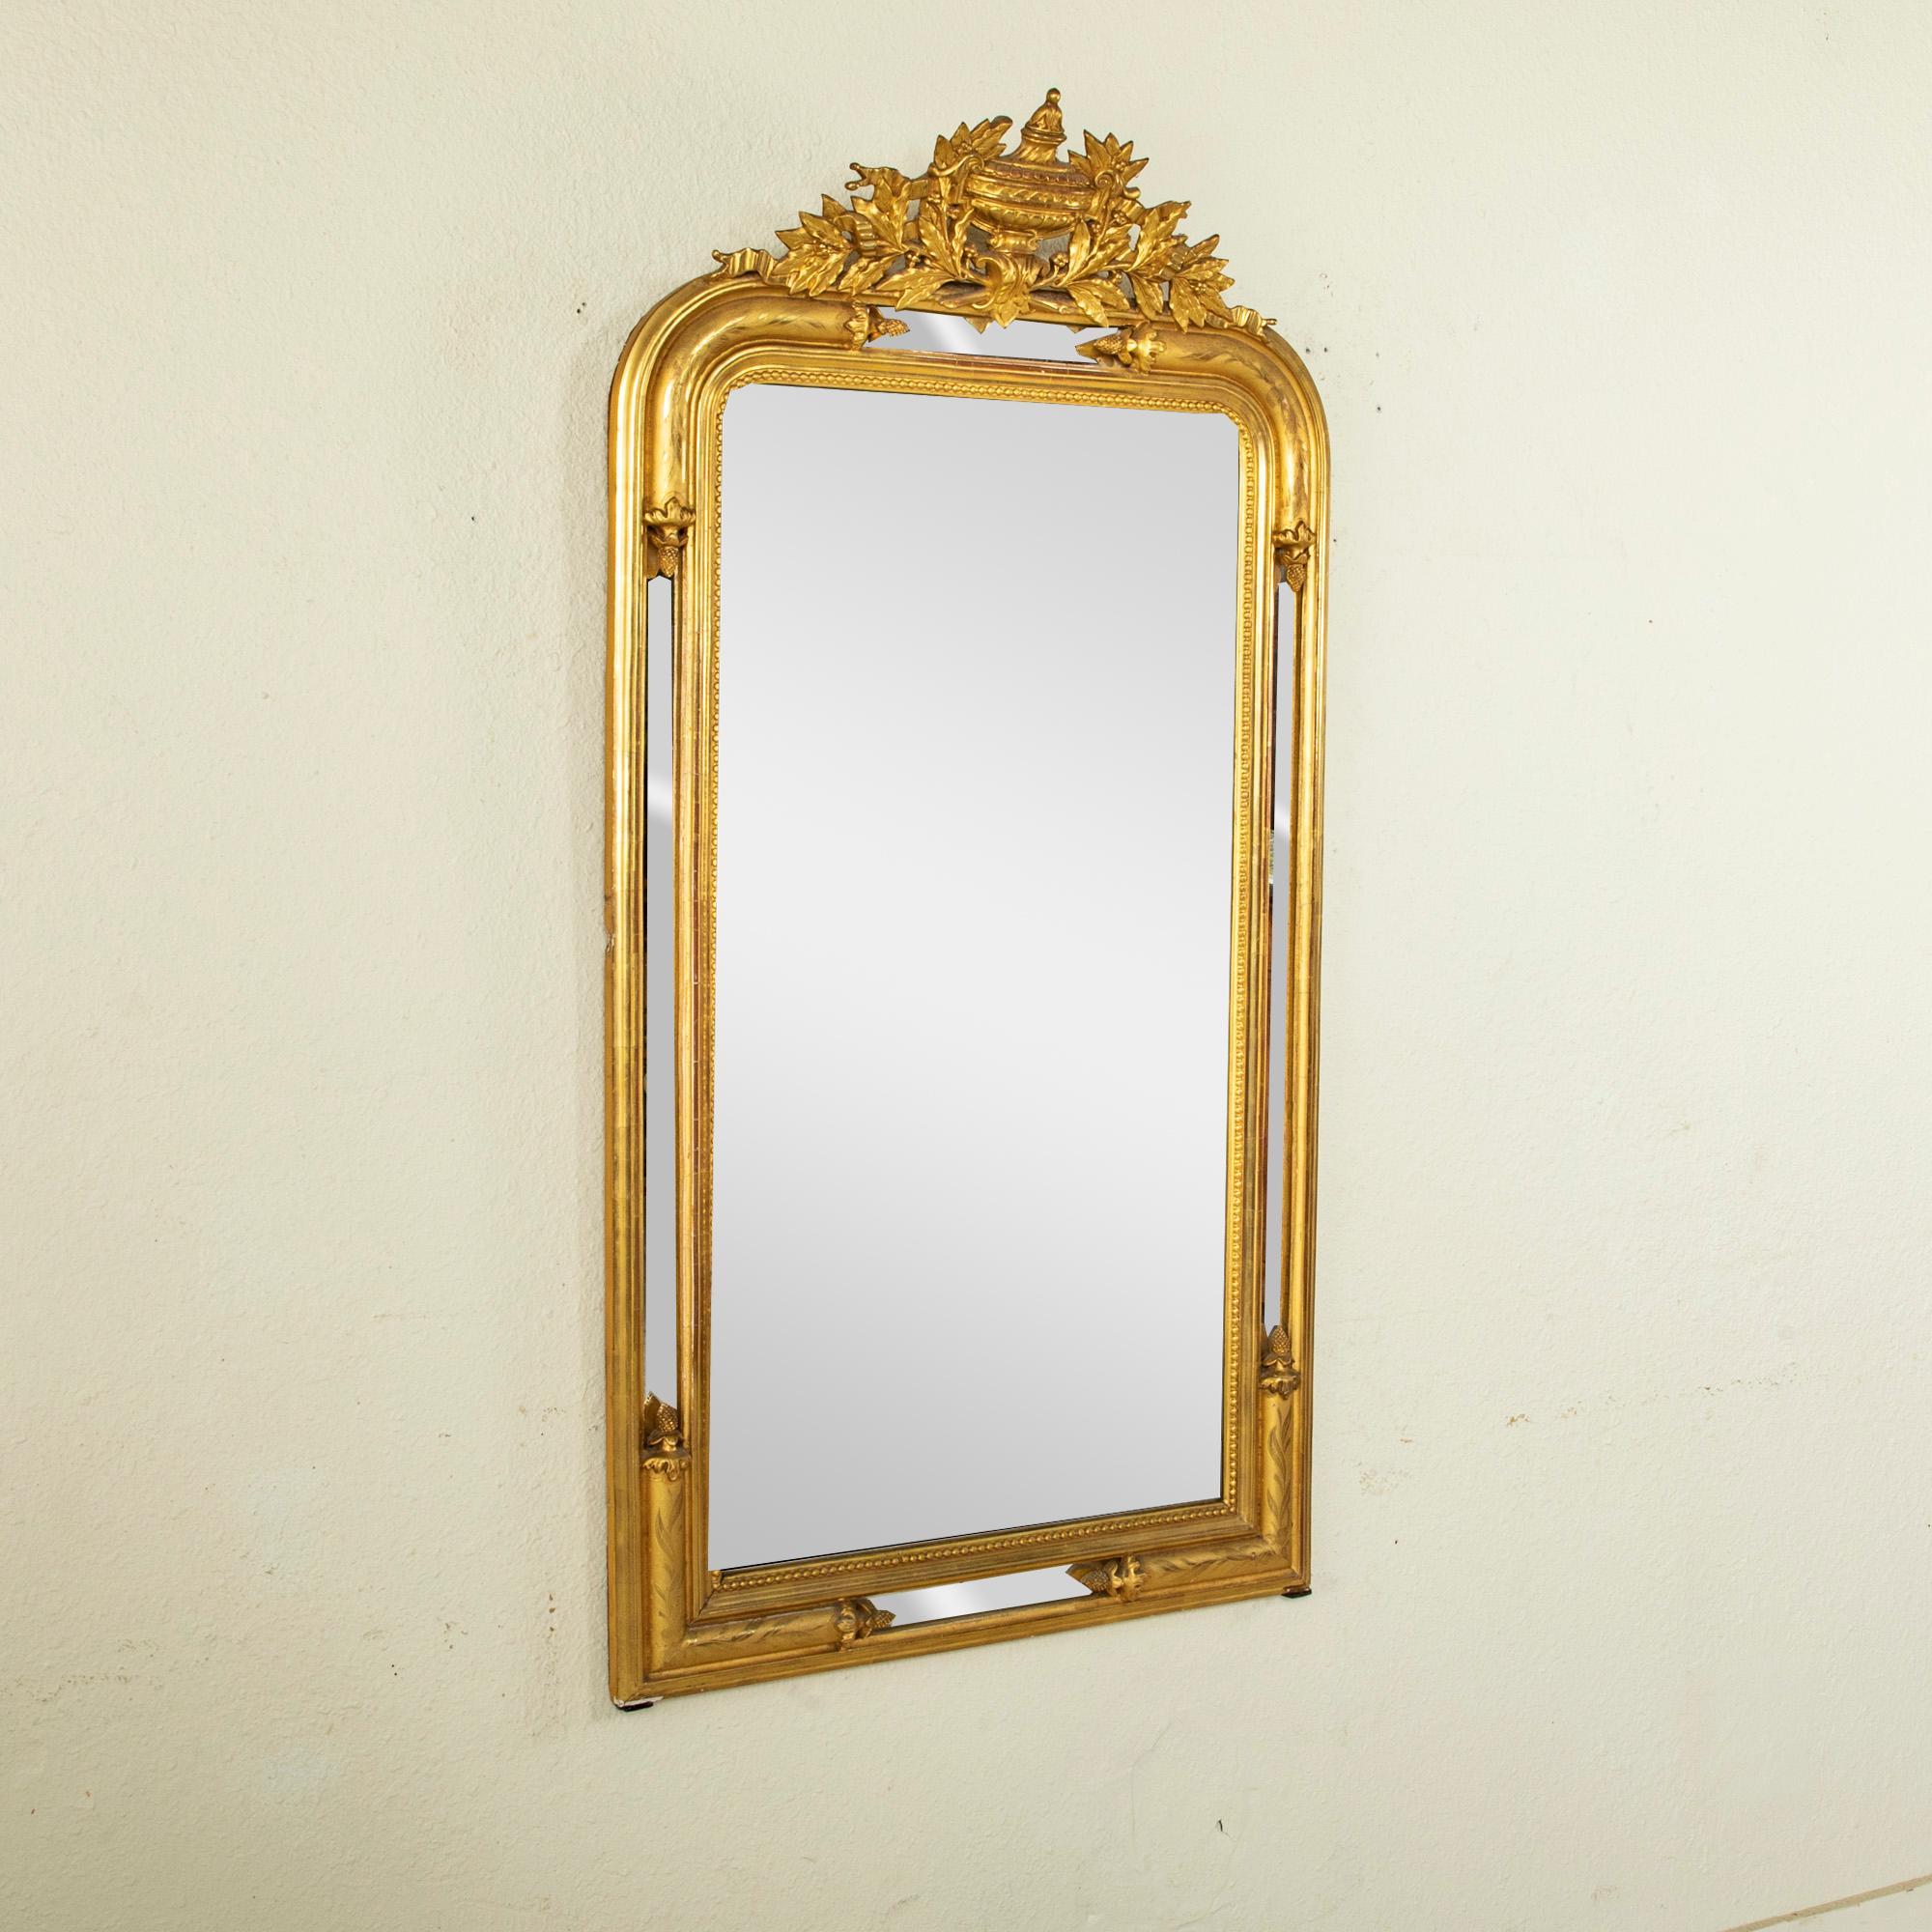 Mid-19th Century French Louis XVI Style Giltwood Mirror with Urn Motif 1